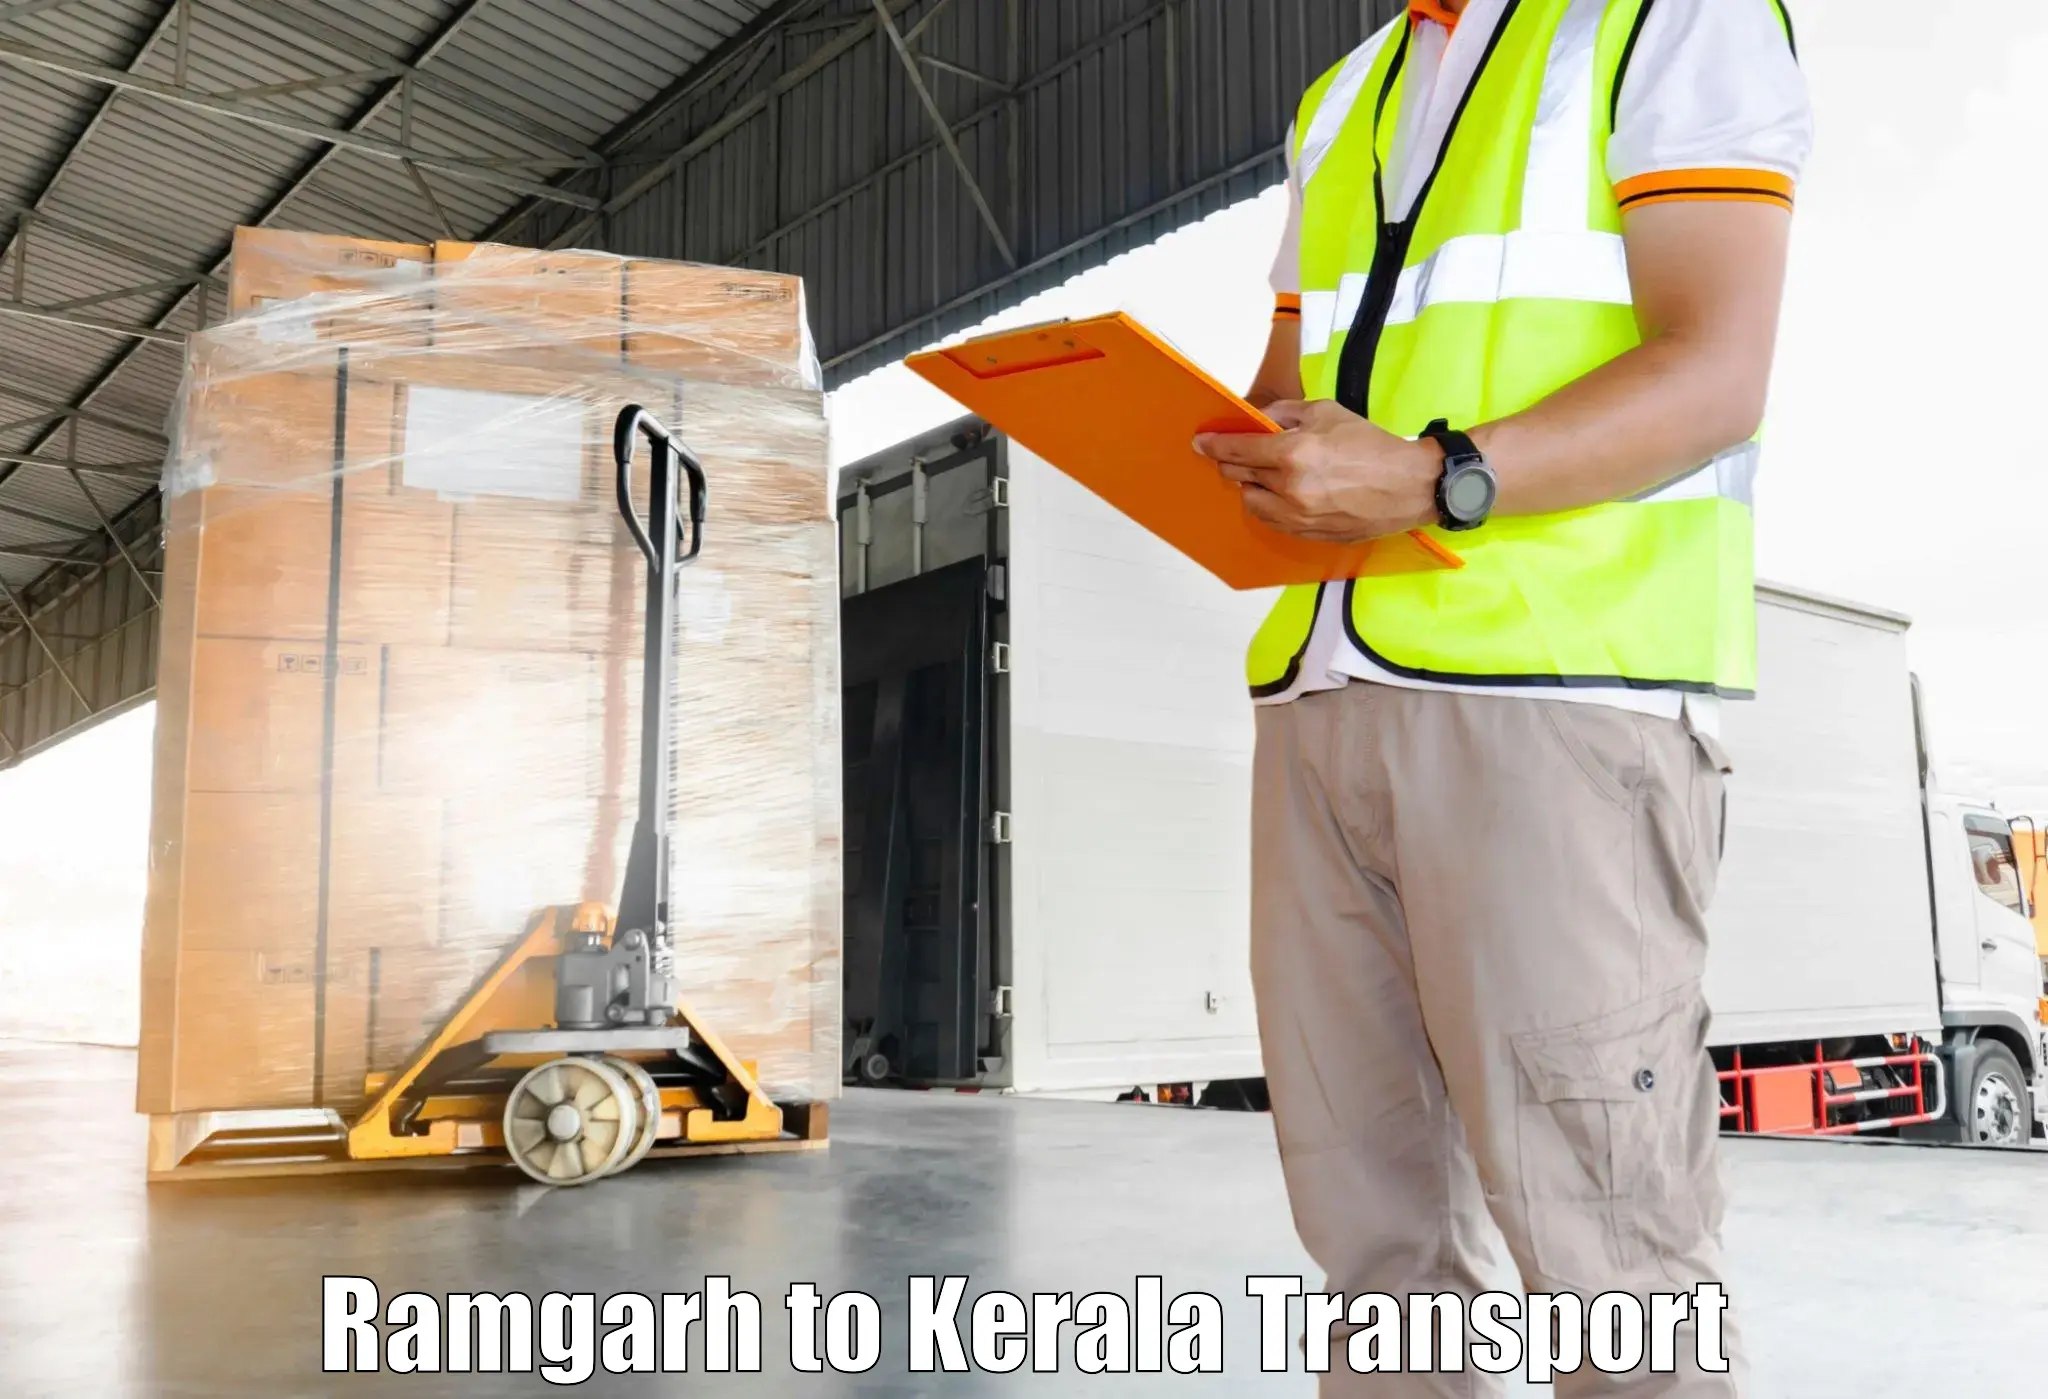 Transport in sharing in Ramgarh to Thrissur